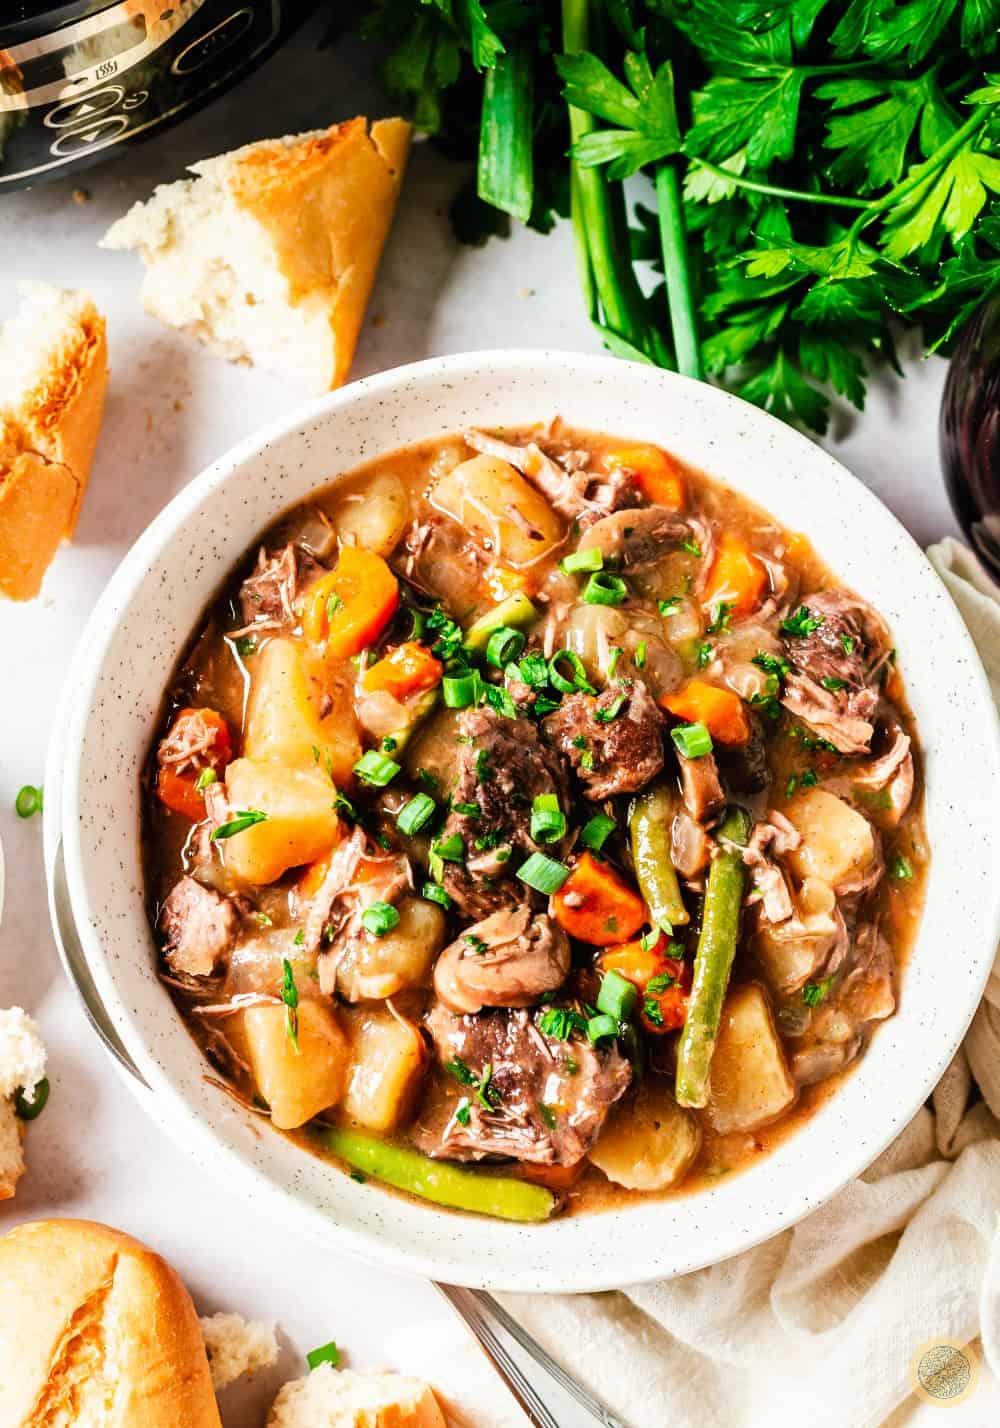 How to make slow cooker beef stew